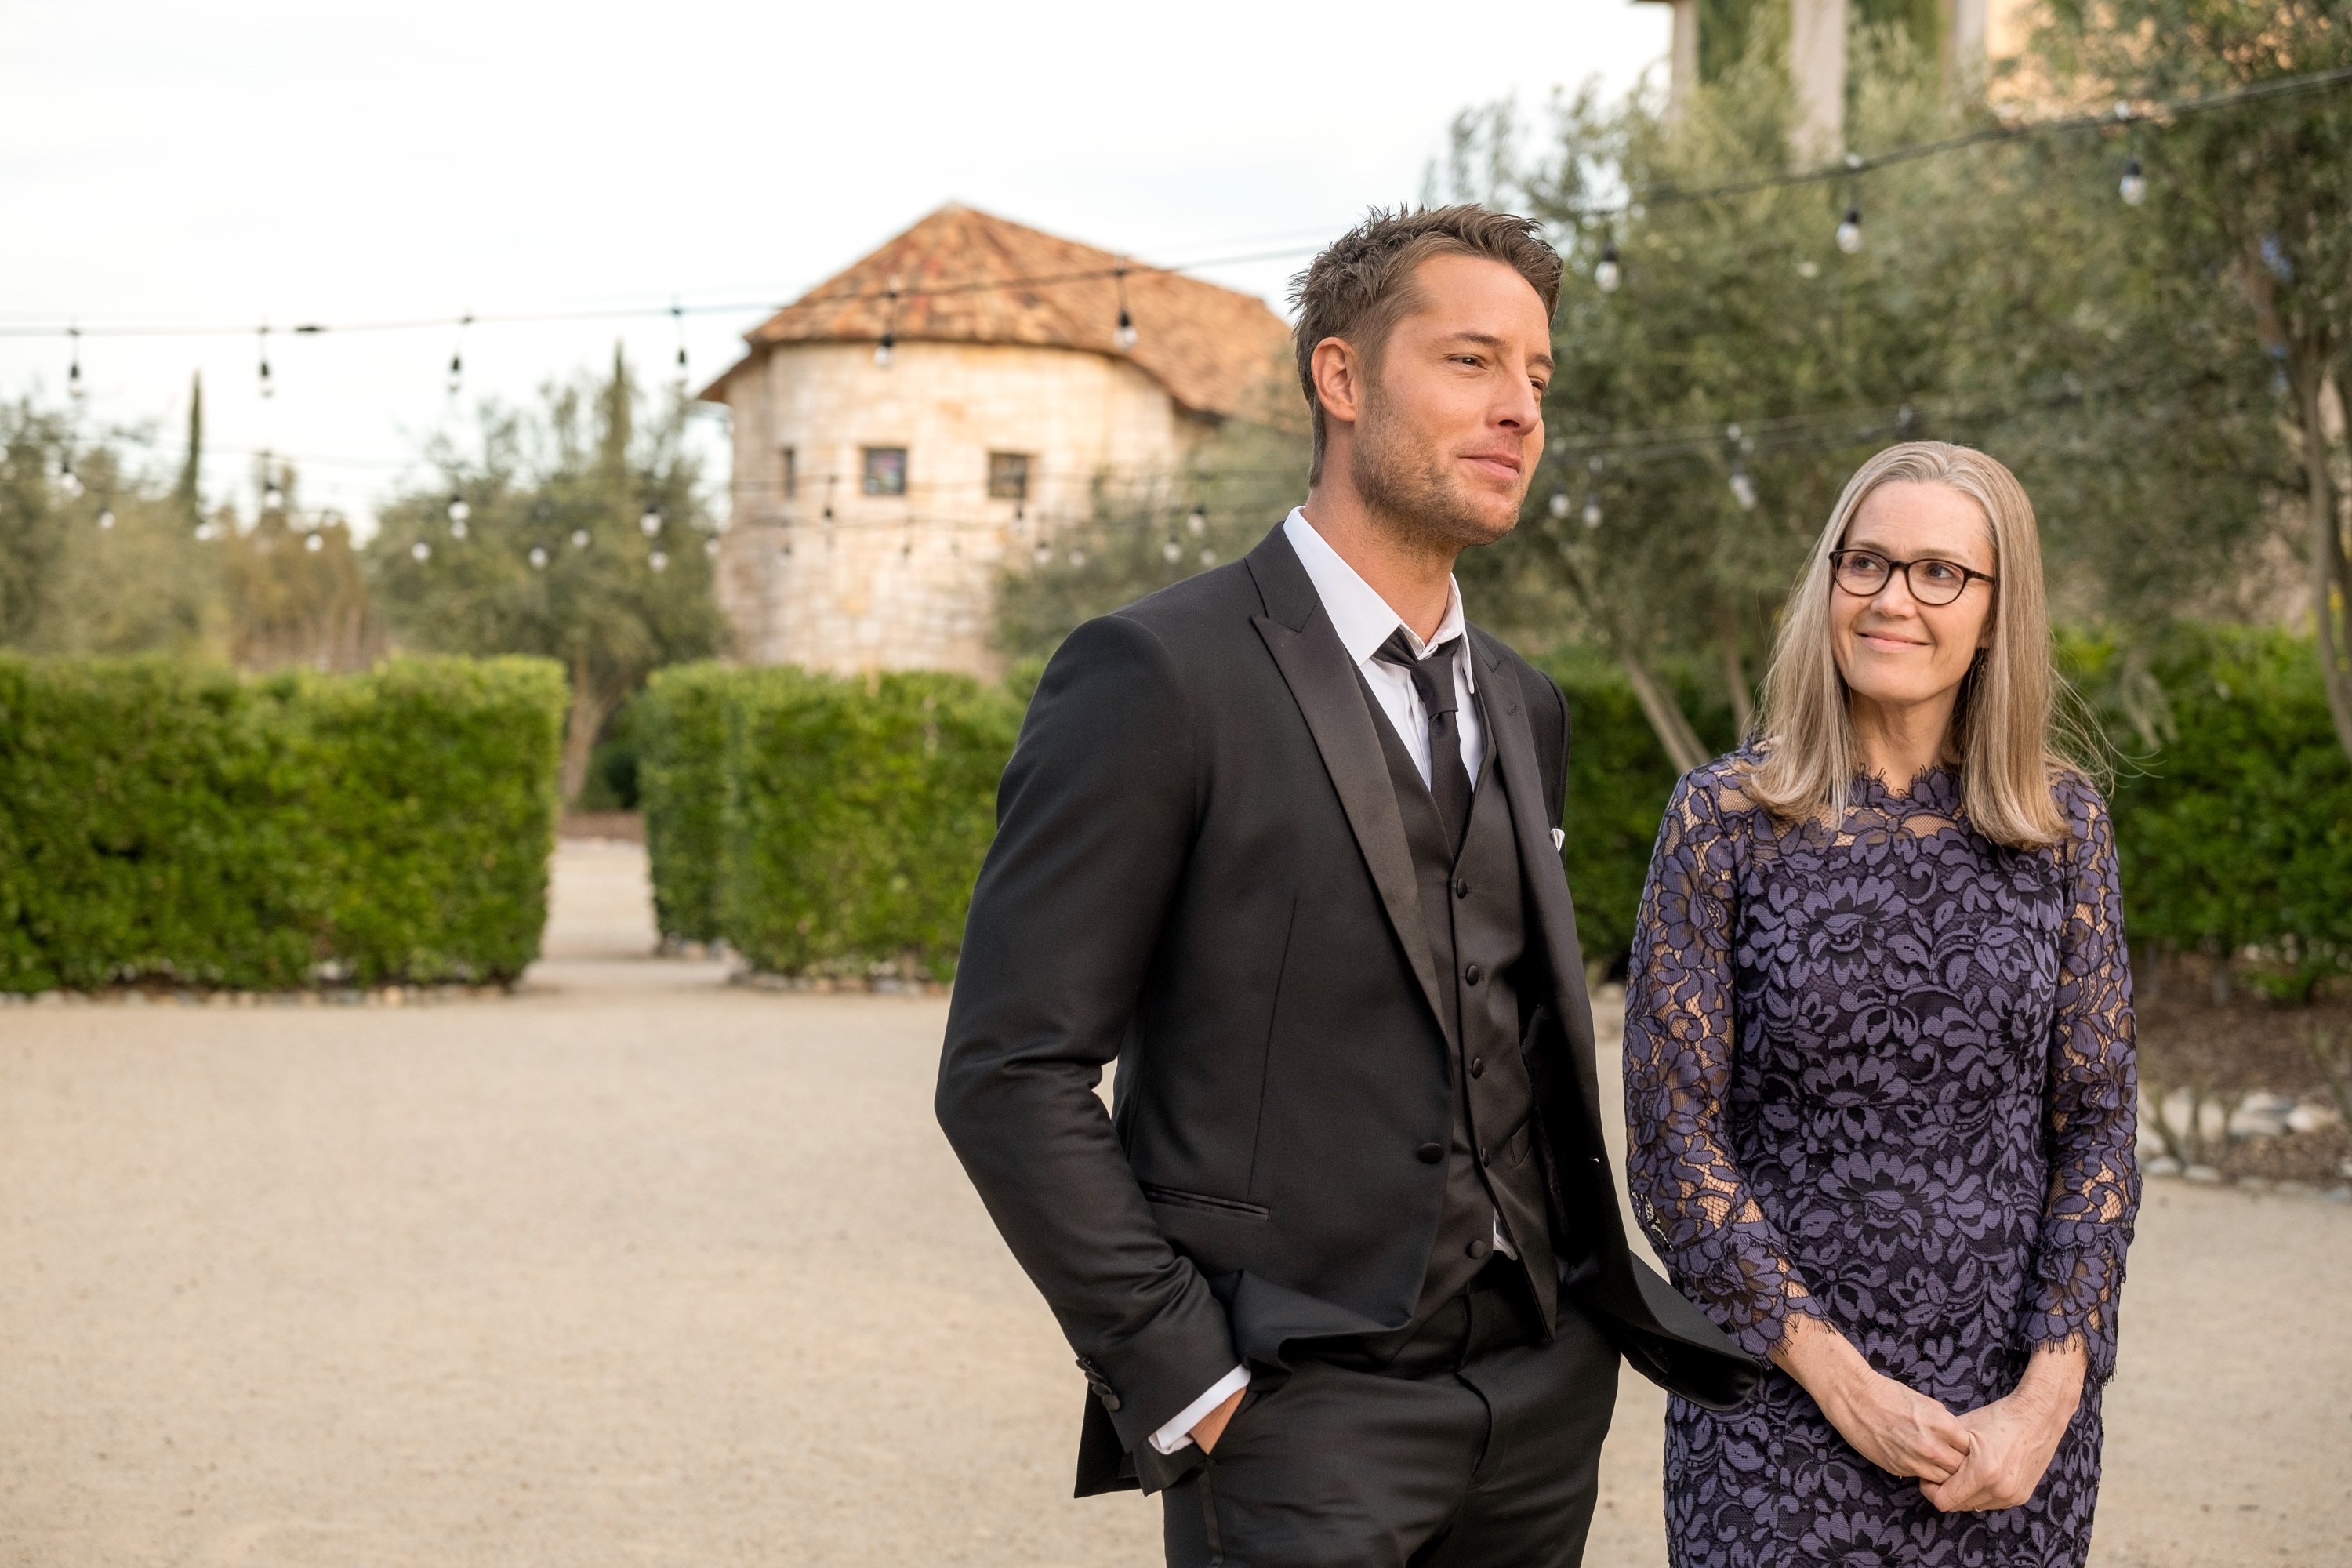 'This Is Us' Justin Hartley as Kevin walking with Mandy Moore as Rebecca